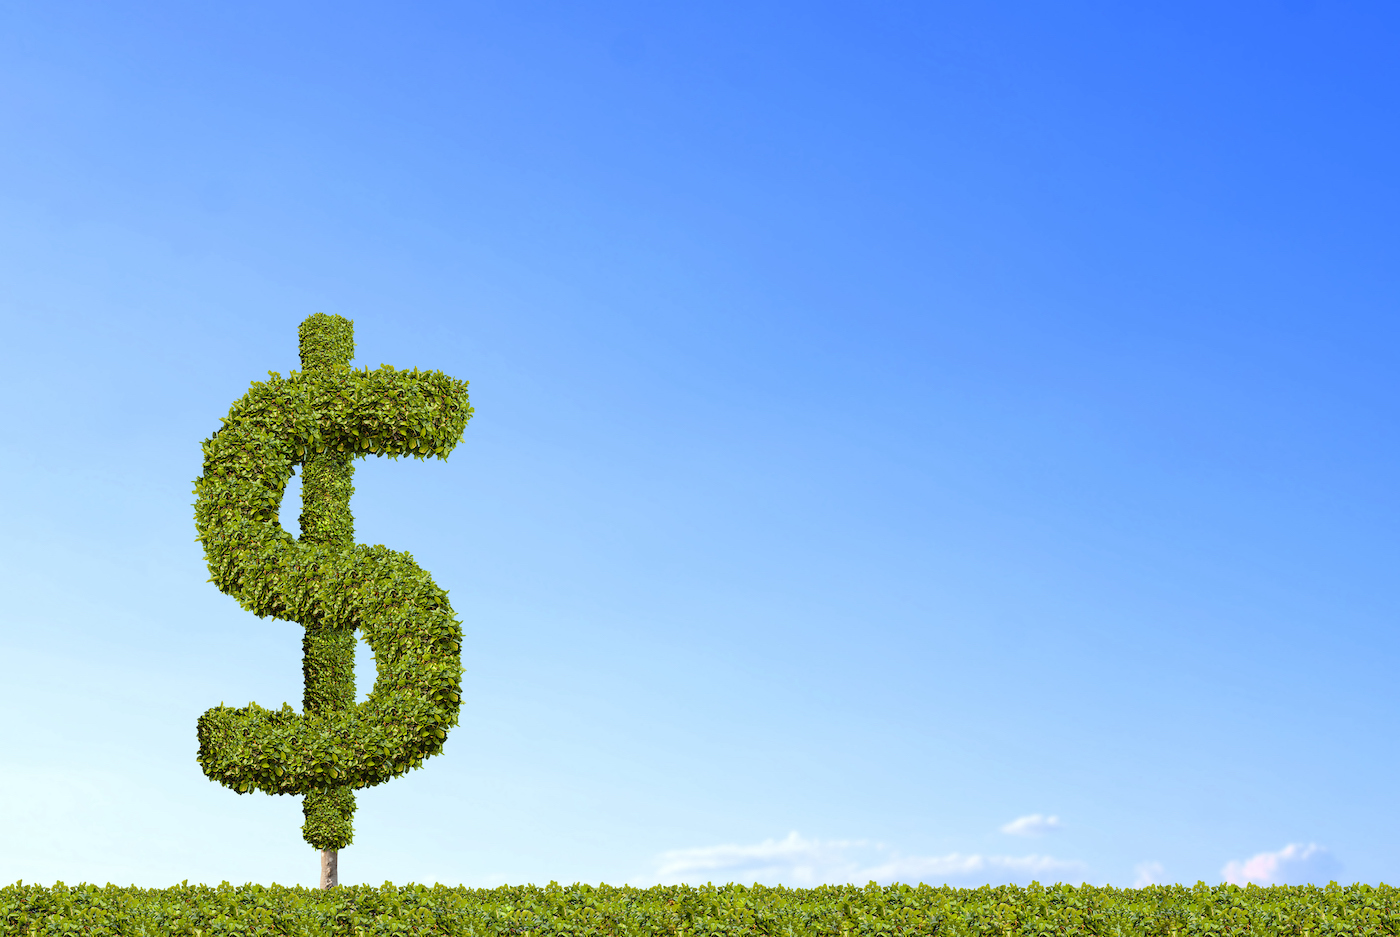 A topiary in the shape of a dollar bill symbol on a green meadow against a blue sky.